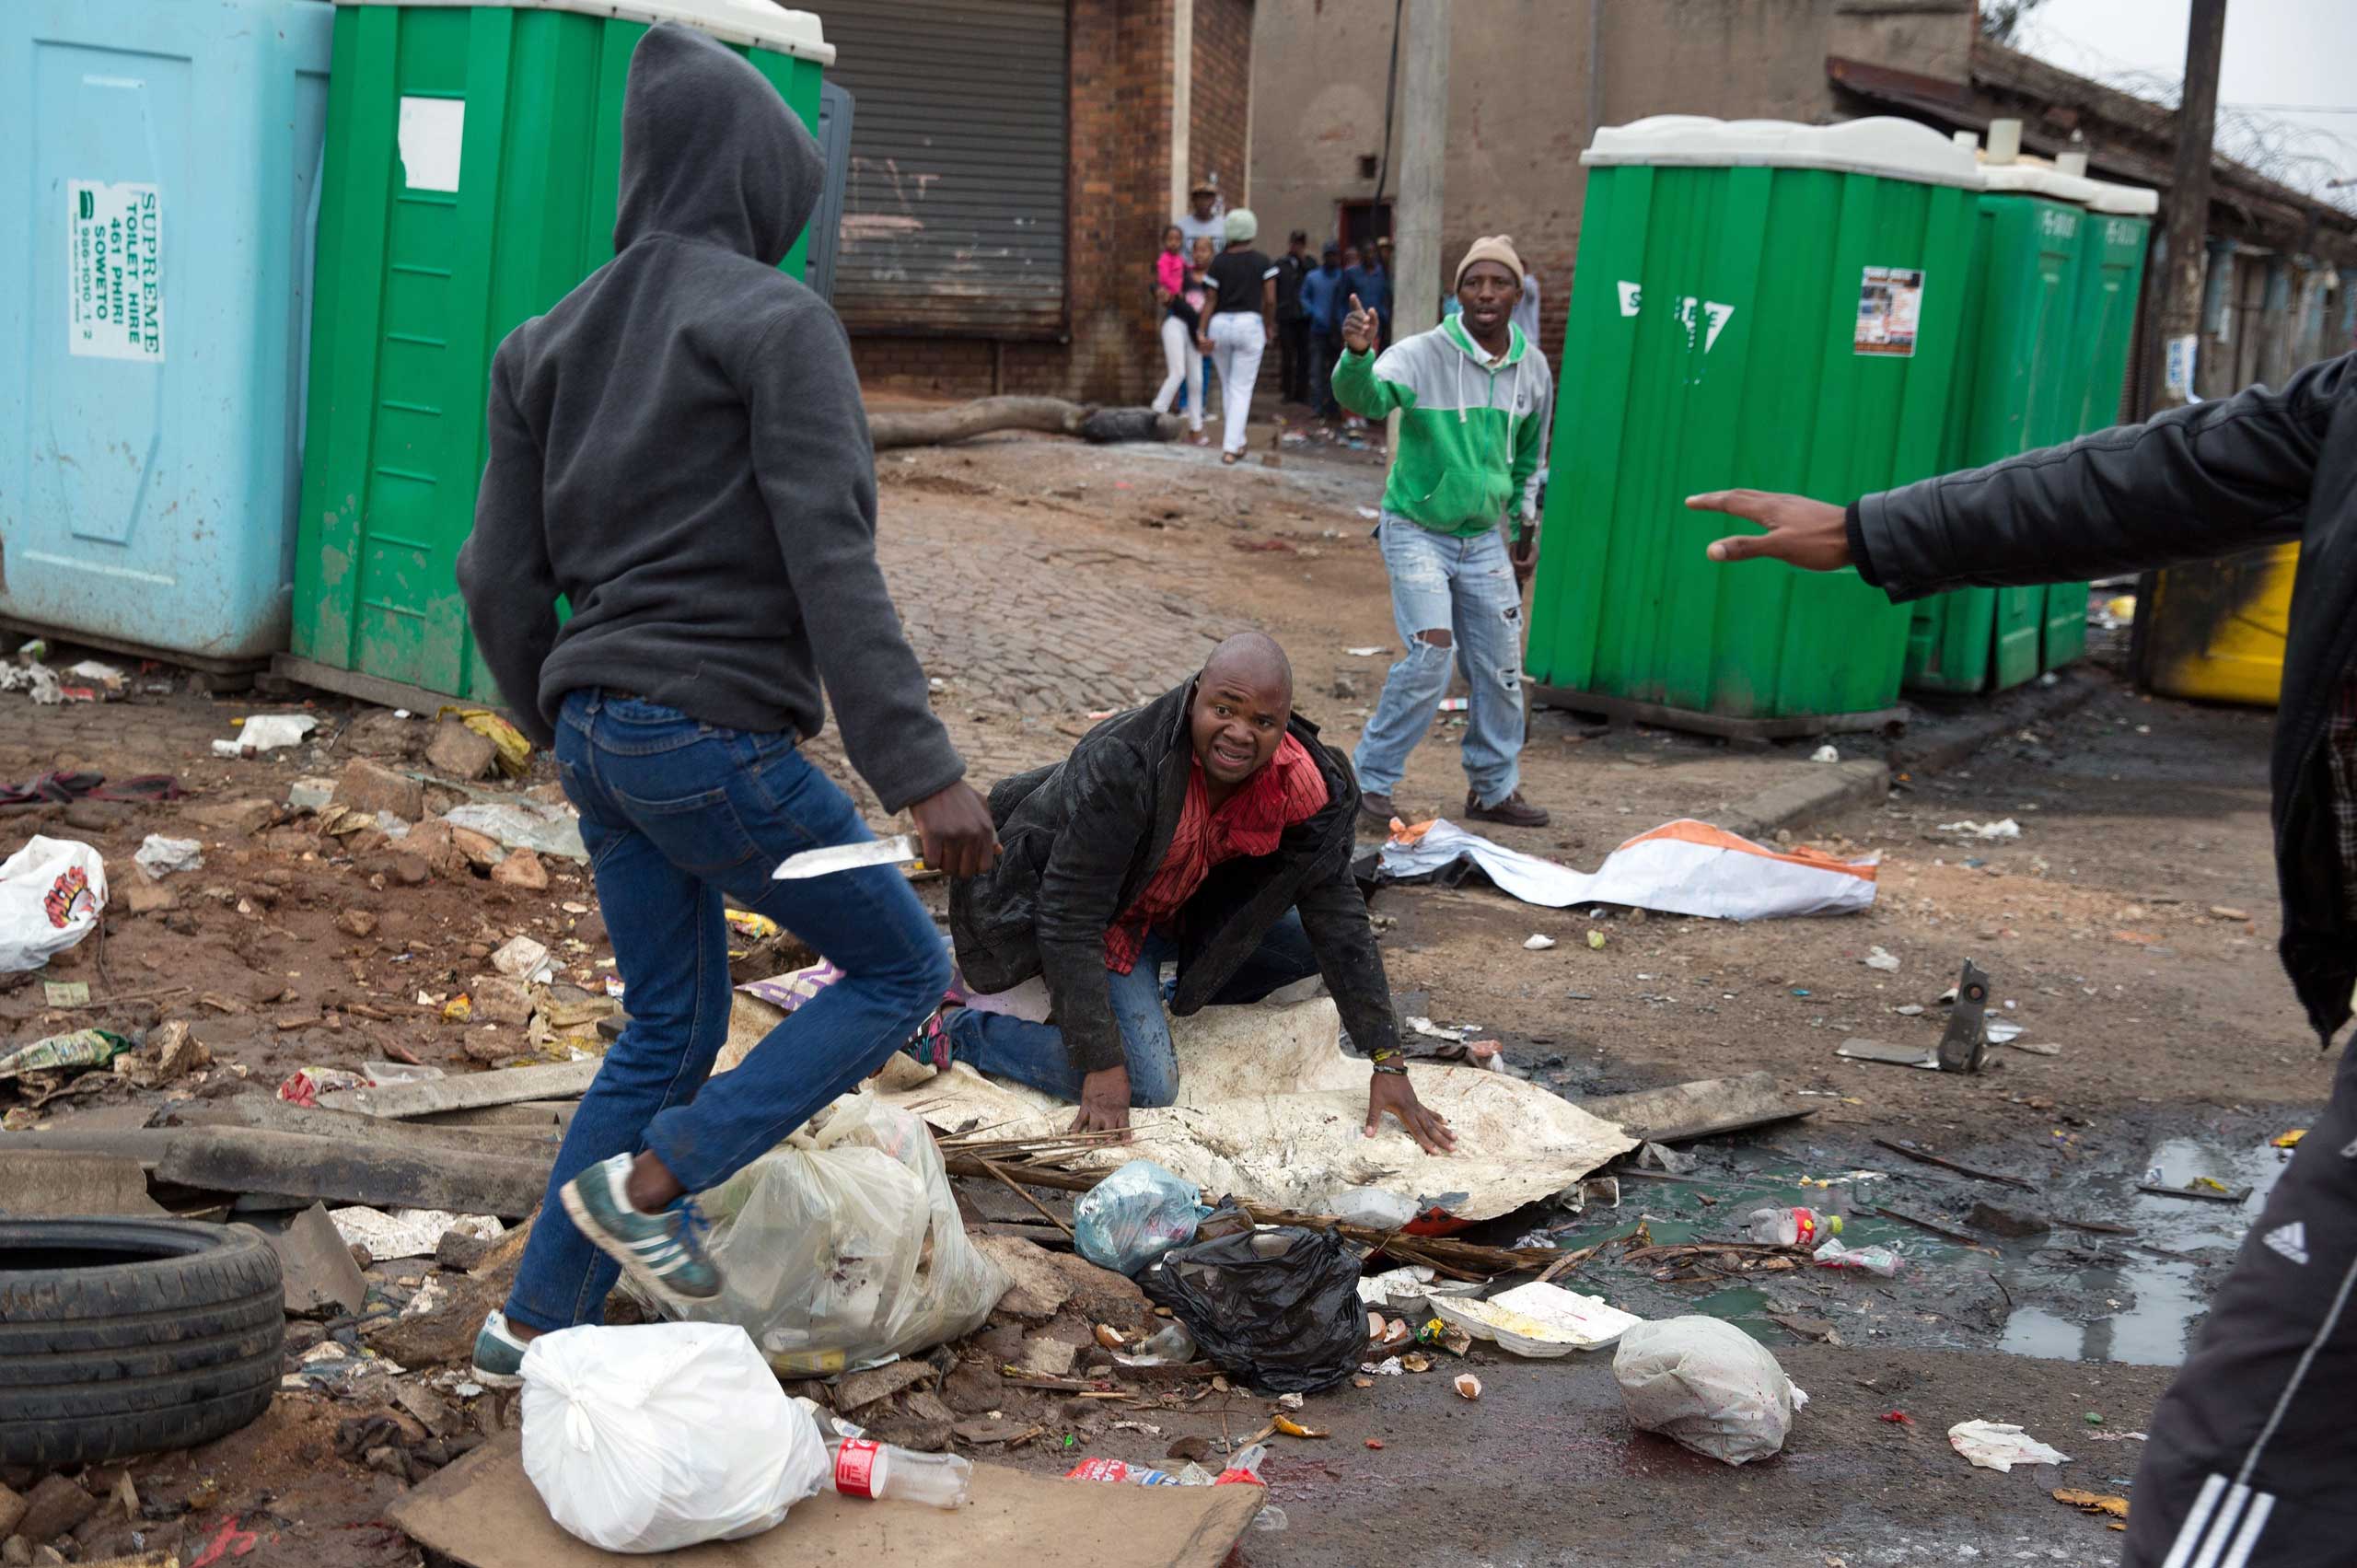 Sithole is attacked by men in Alexandra township during anti-immigrant violence in Johannesburg on April 18, 2015.